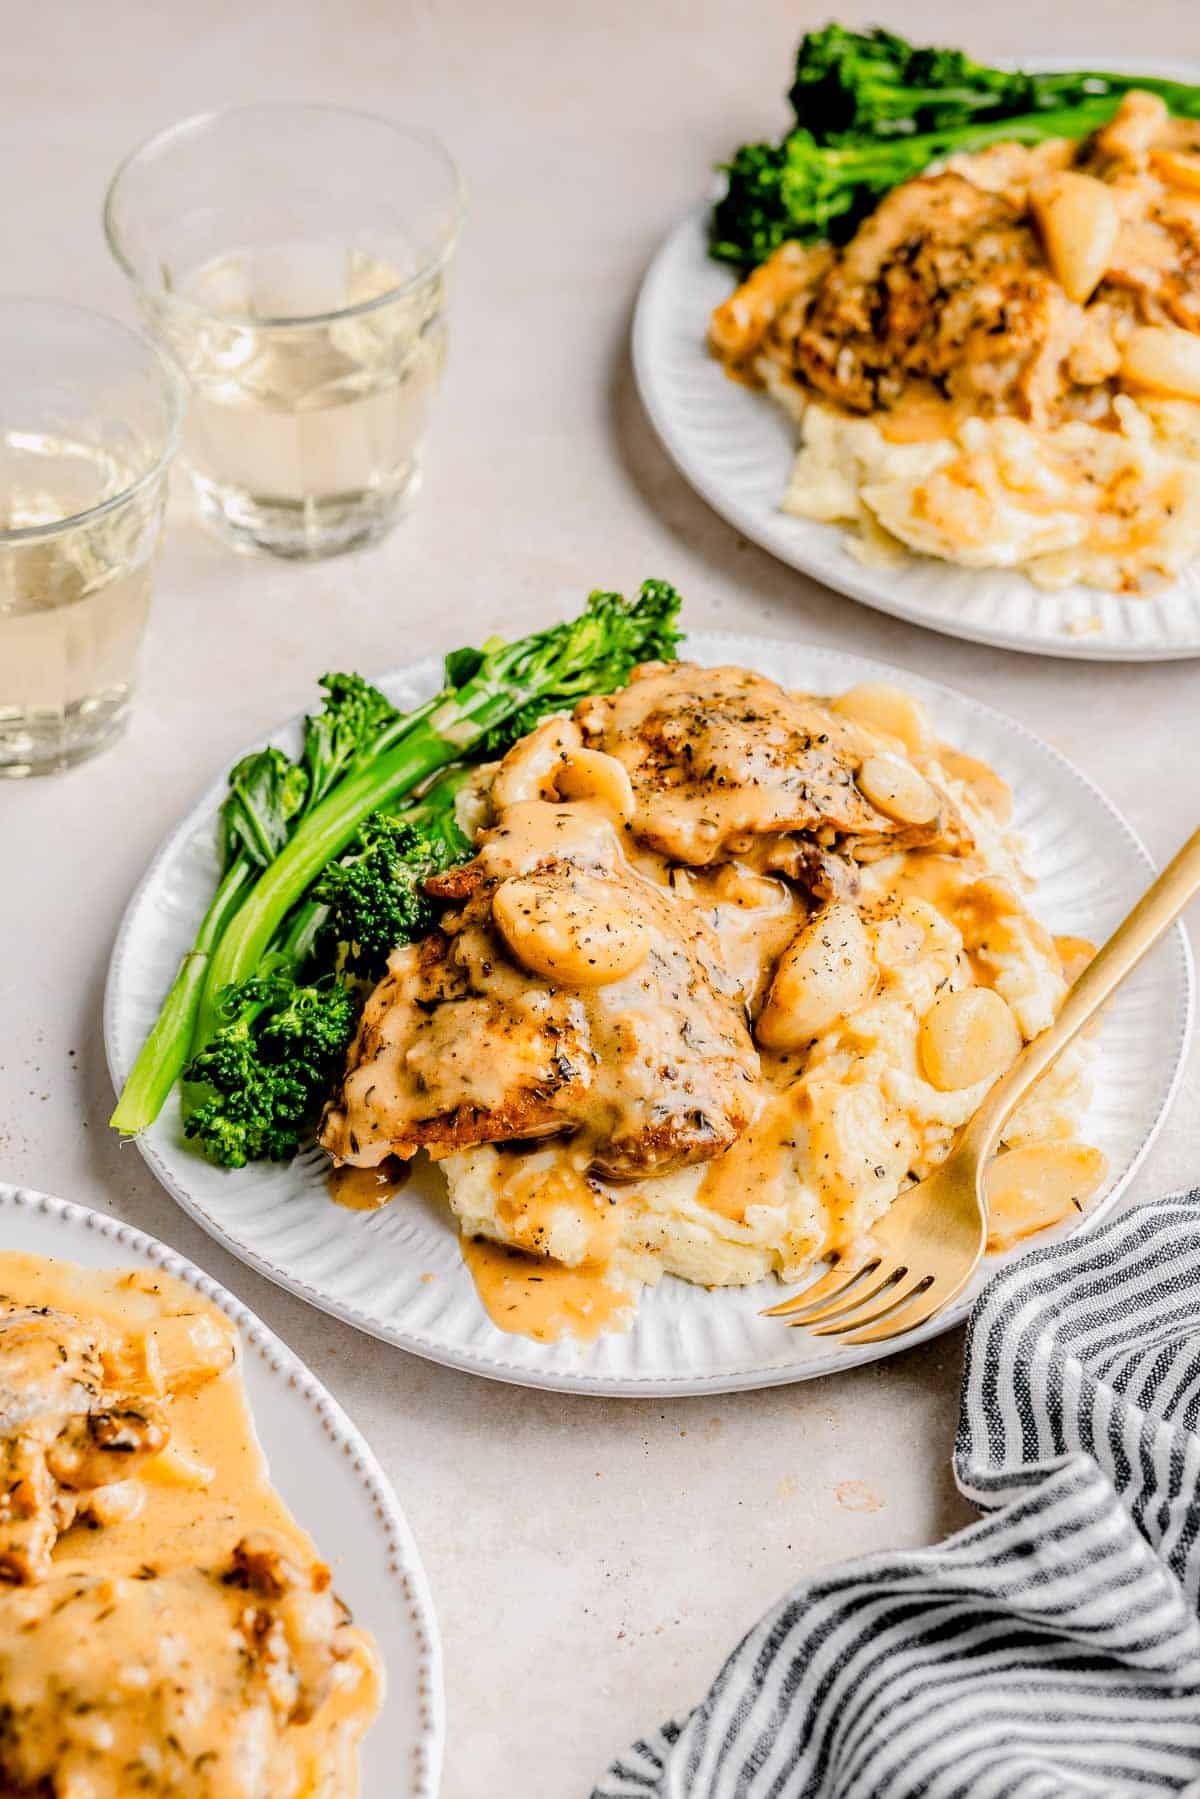 40 clove garlic chicken served on a plates with broccolini.